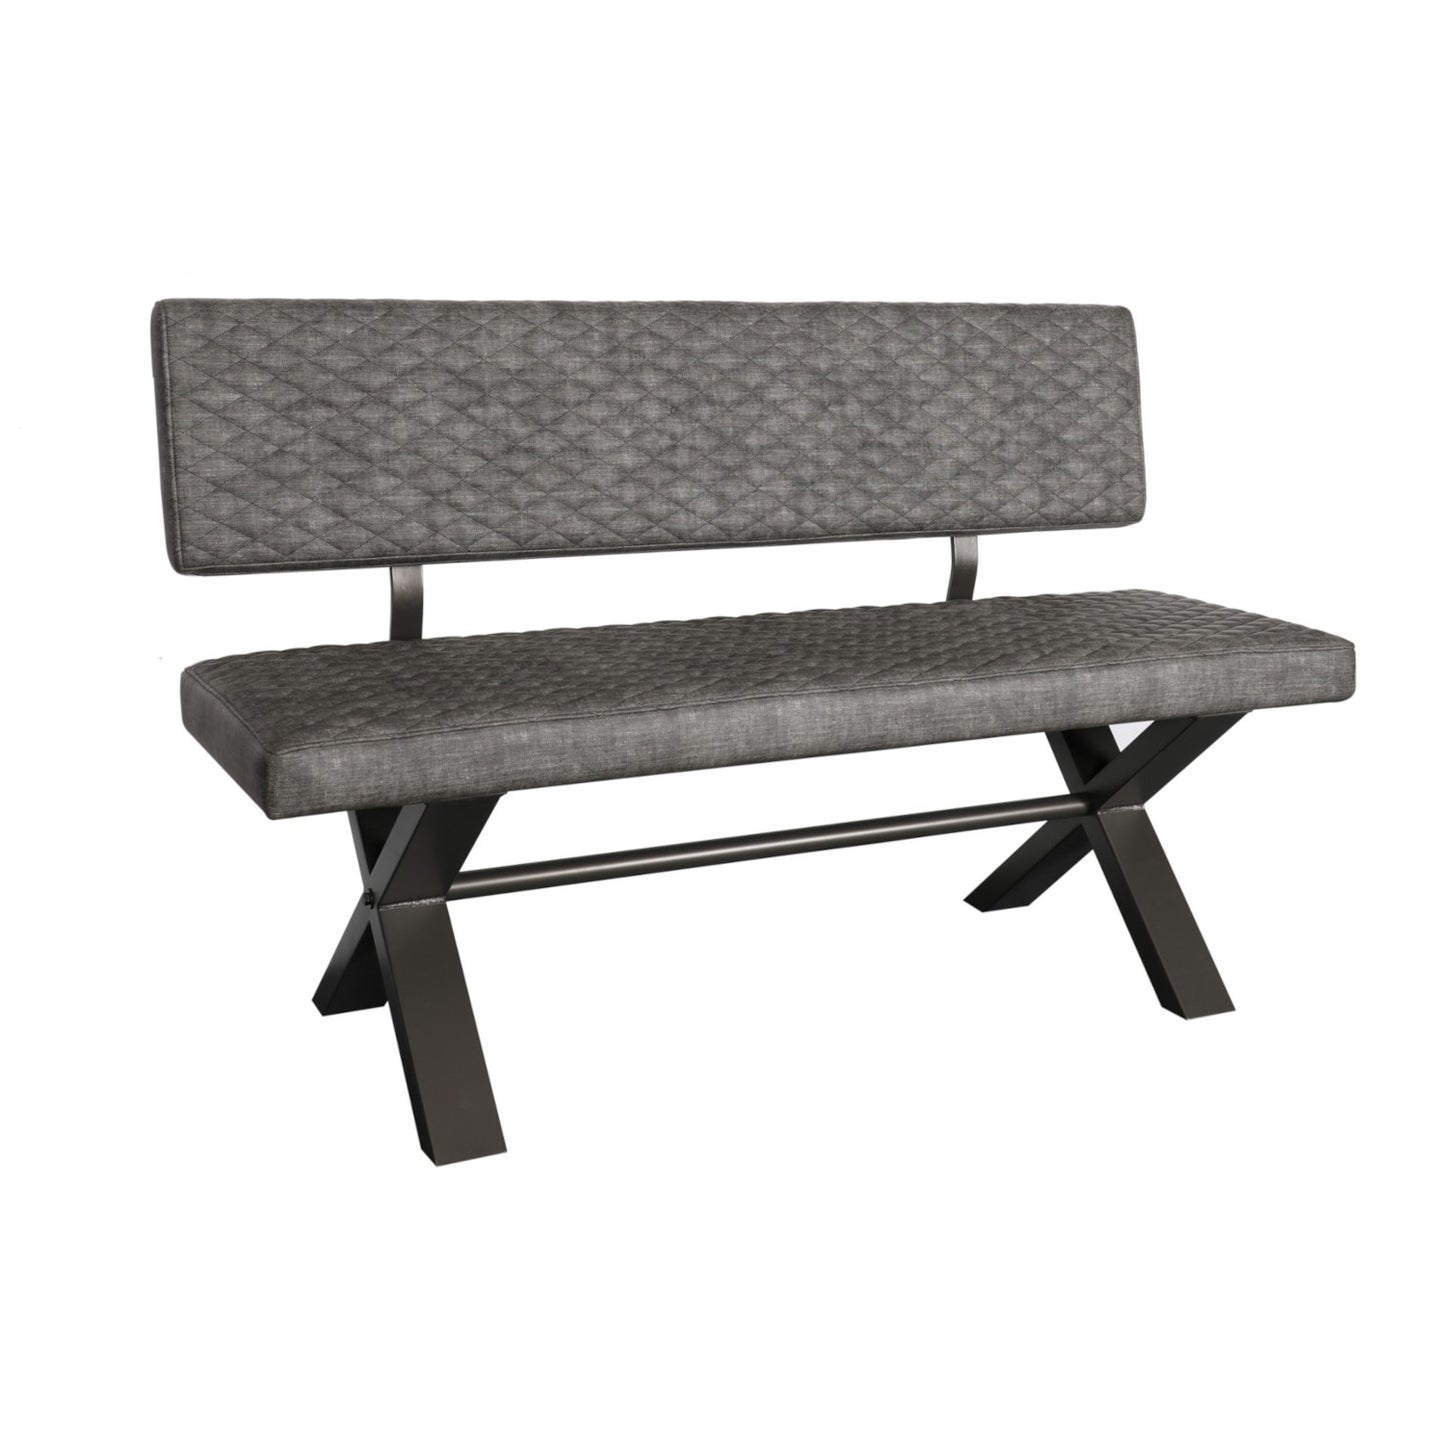 Elsworthy Bench - Small Upholstered With Back